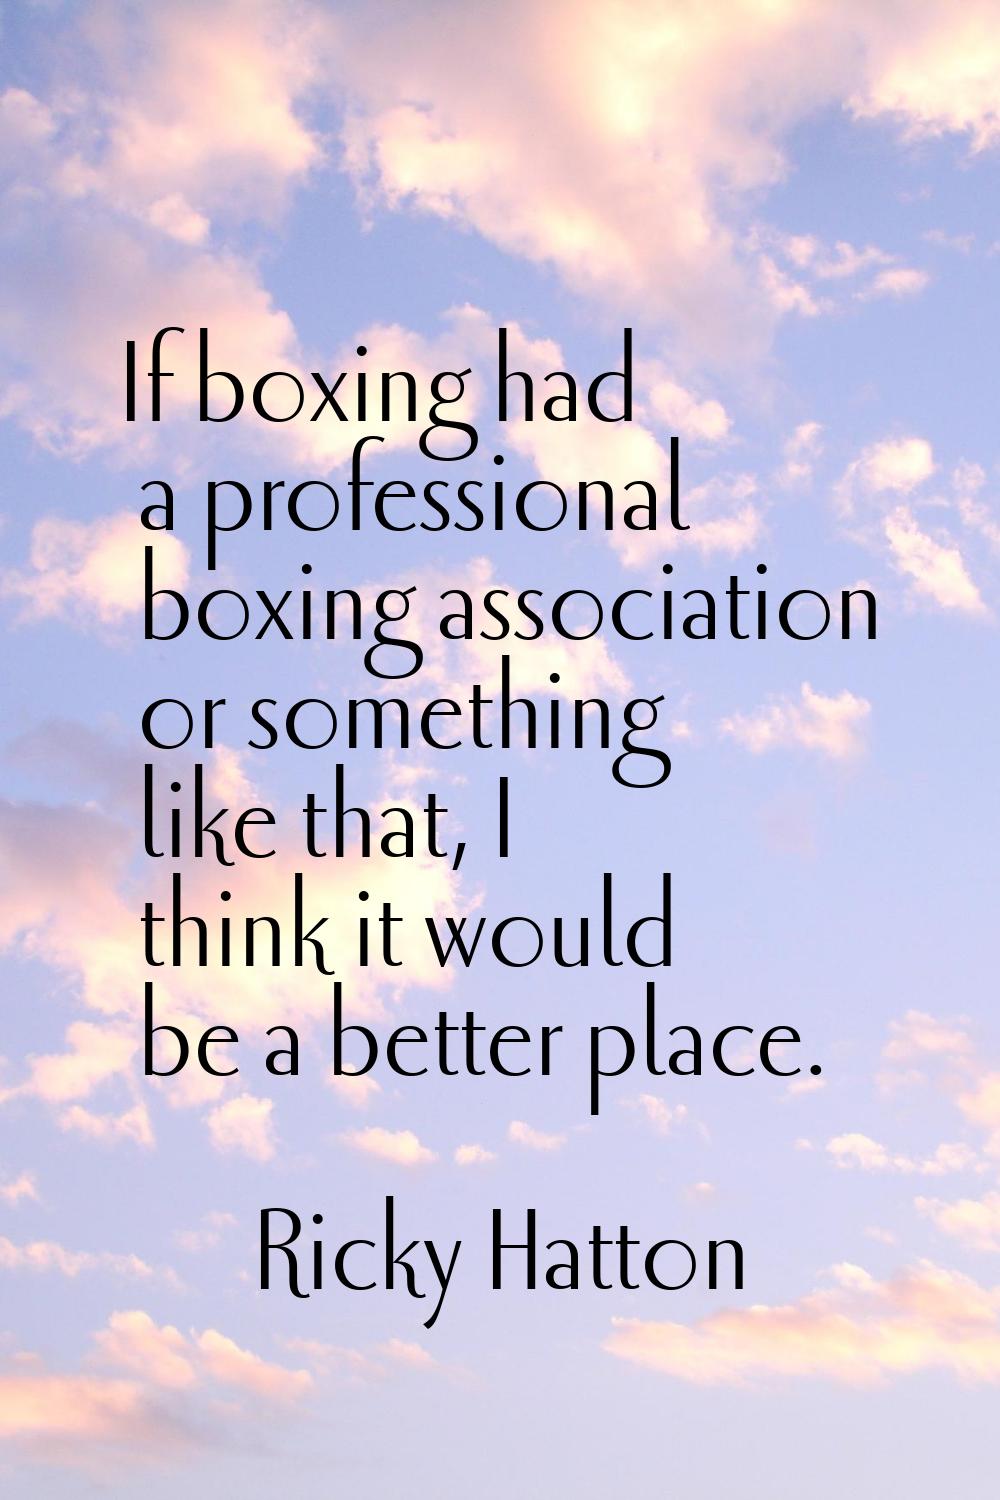 If boxing had a professional boxing association or something like that, I think it would be a bette